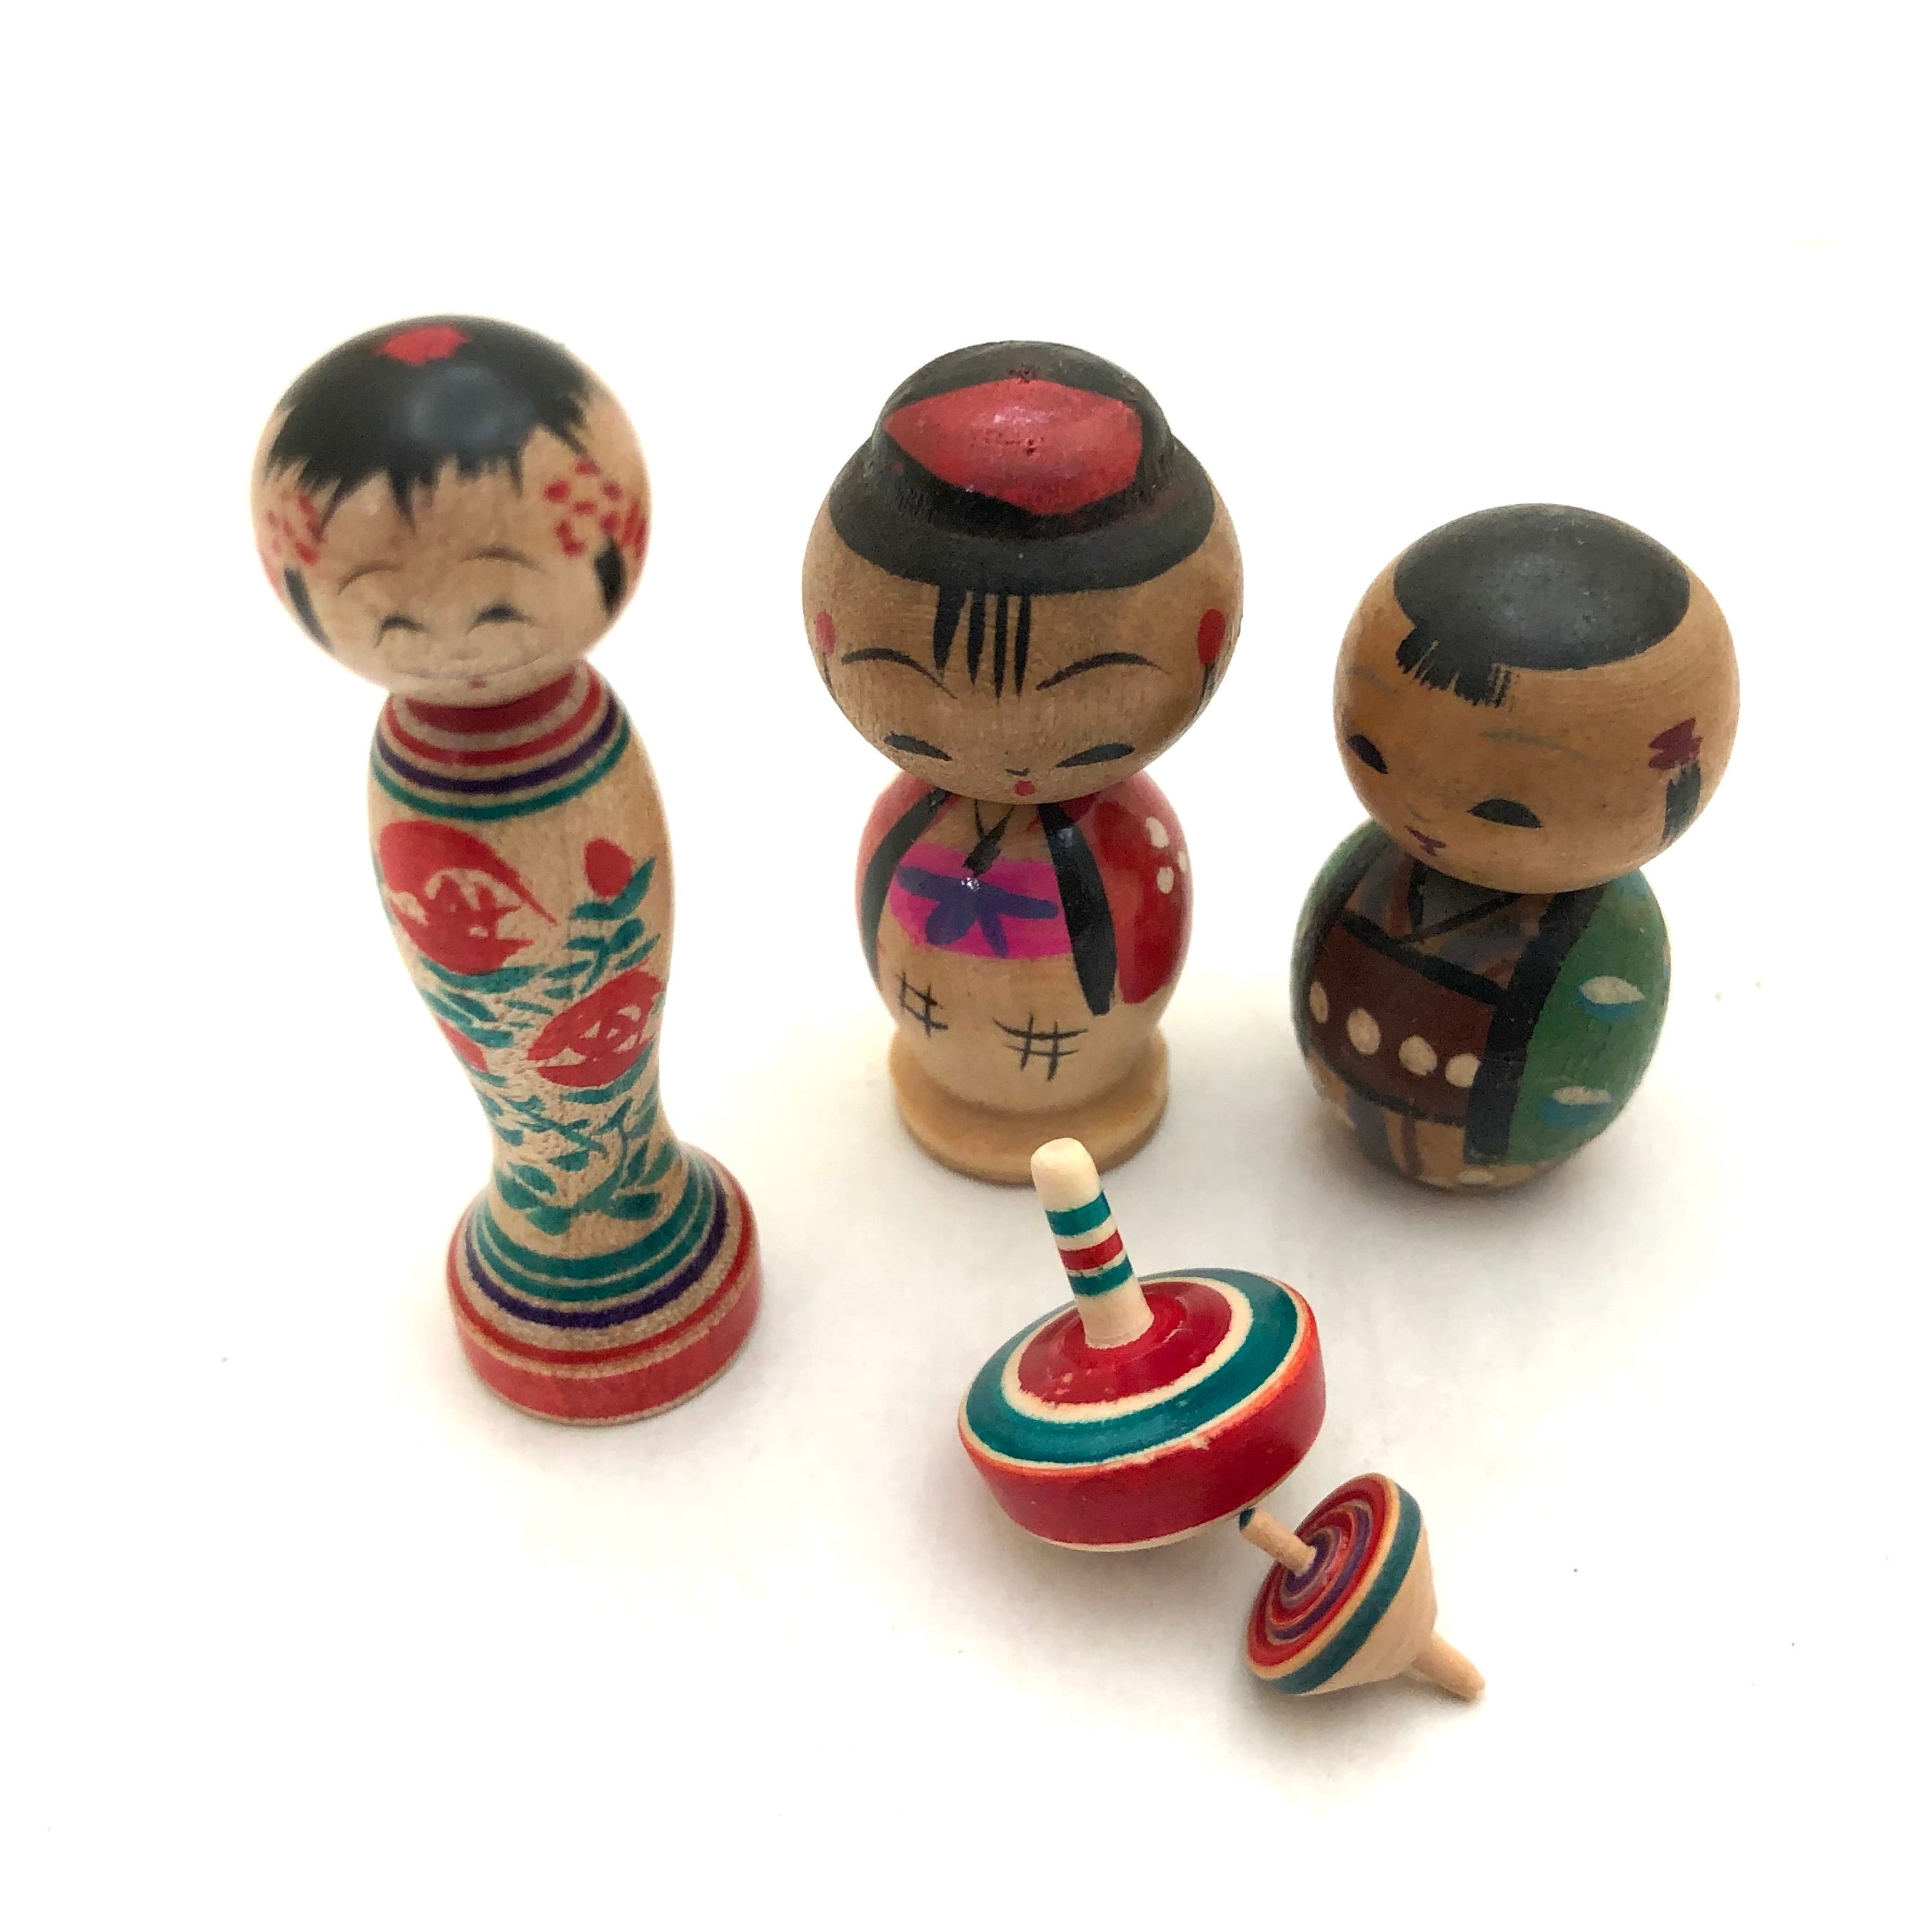 Vintage Japanese Miniature Traditional Kokeshi Toys | “Mame-omocha” from a Childs Toy Box